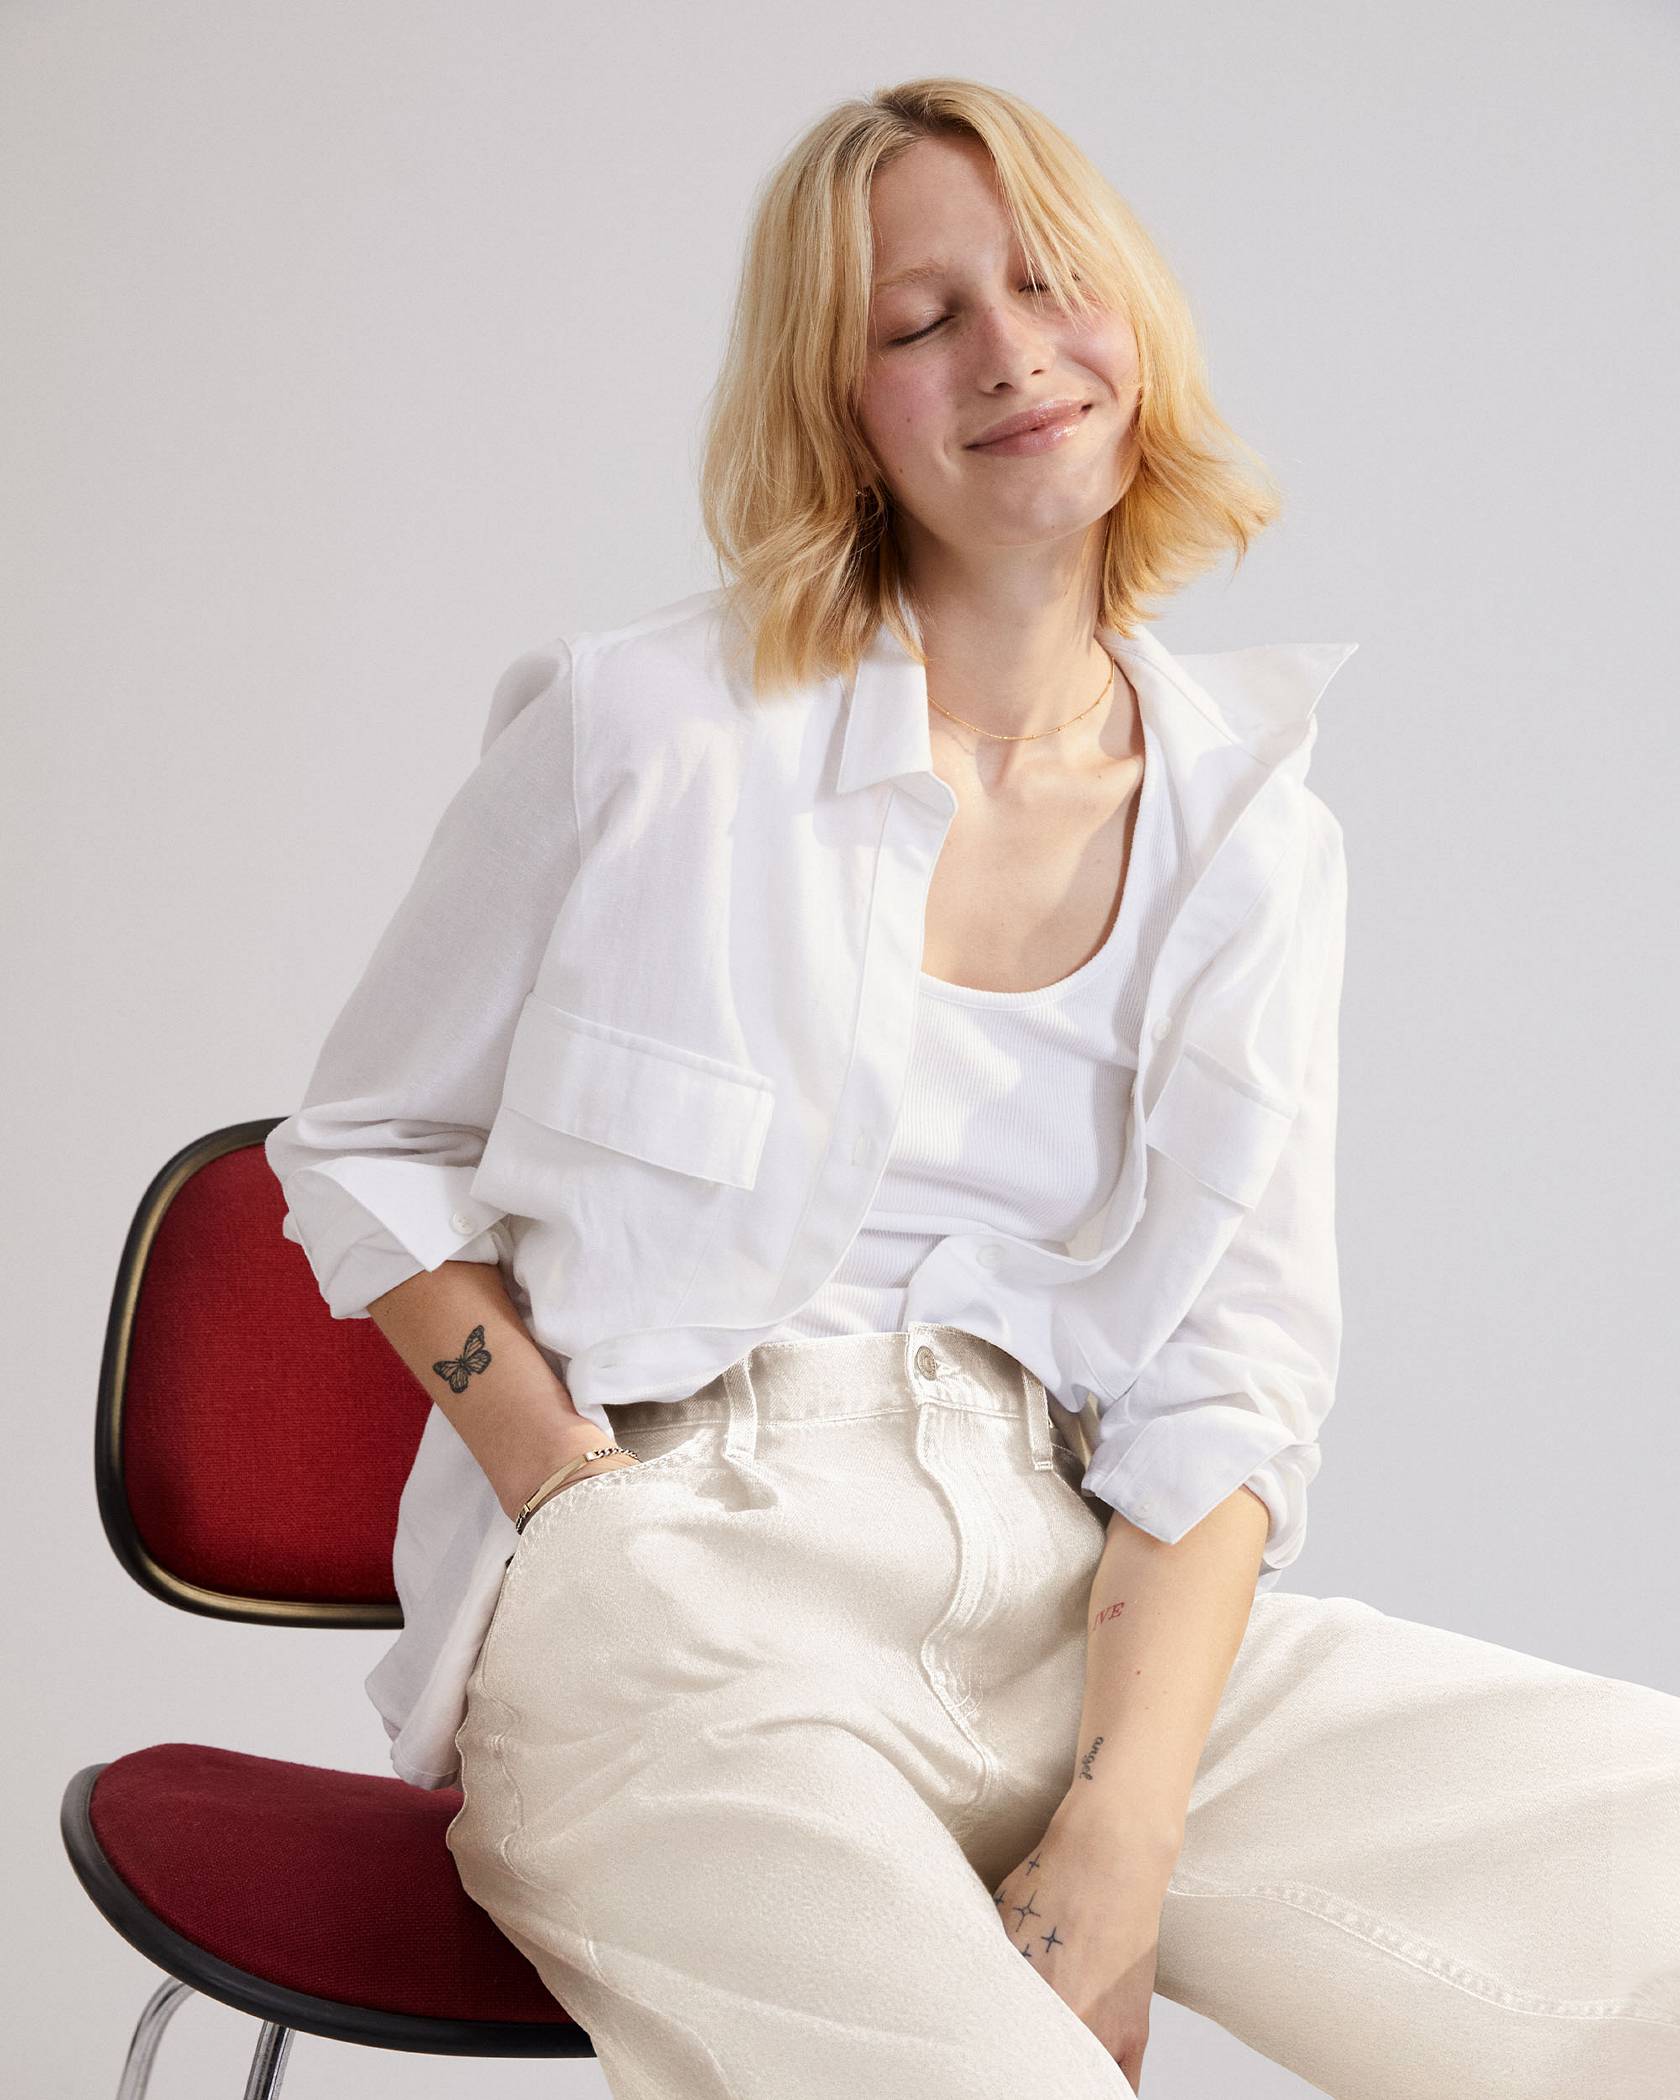 Model sitting on a chair in women's white button down top and cream colored baggy jeans